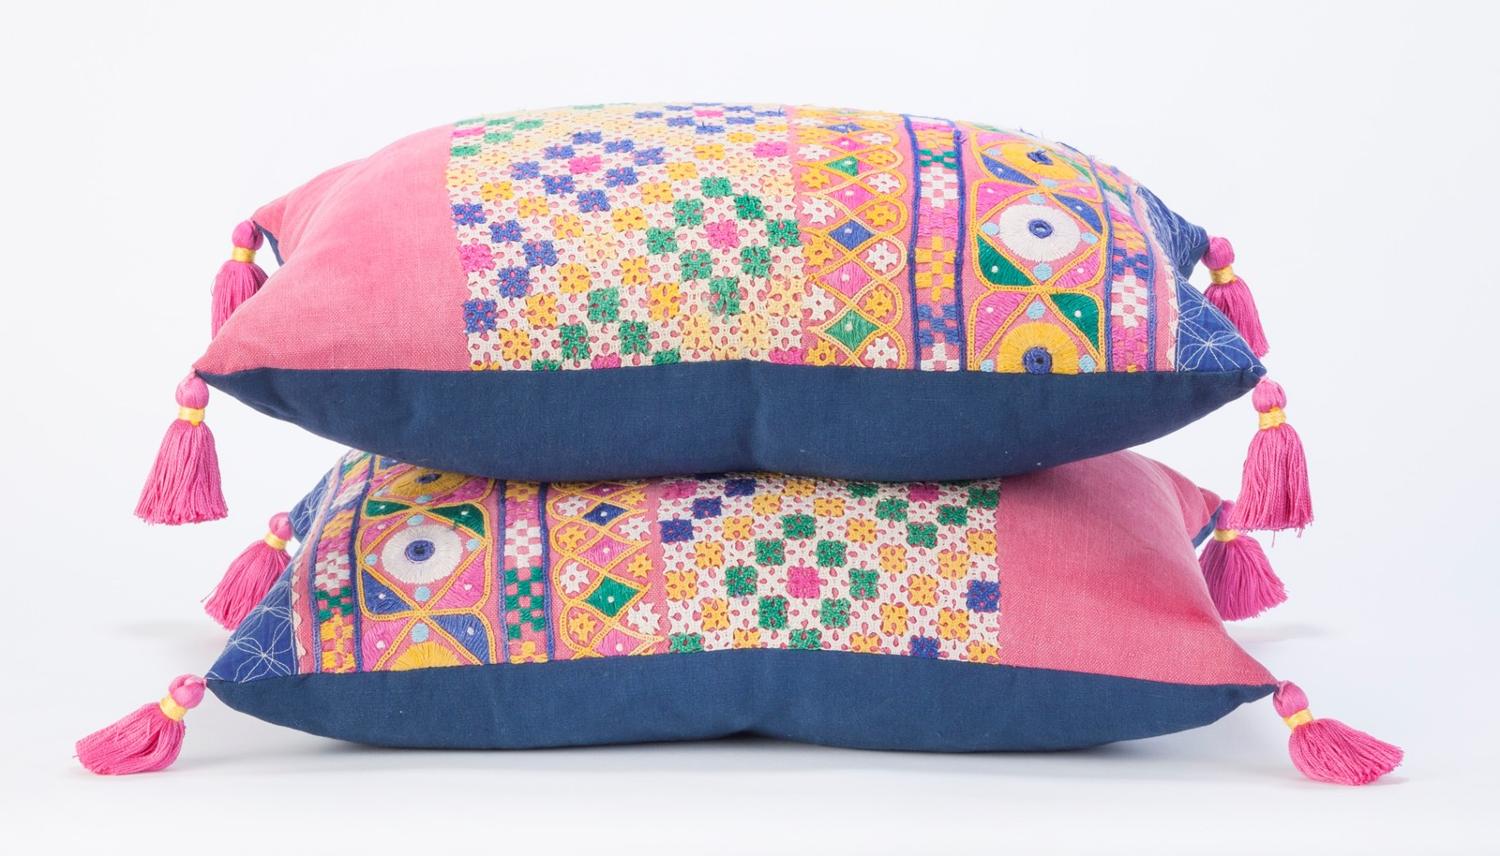 Rajasthan Skirt Cushions with Pink Tassels